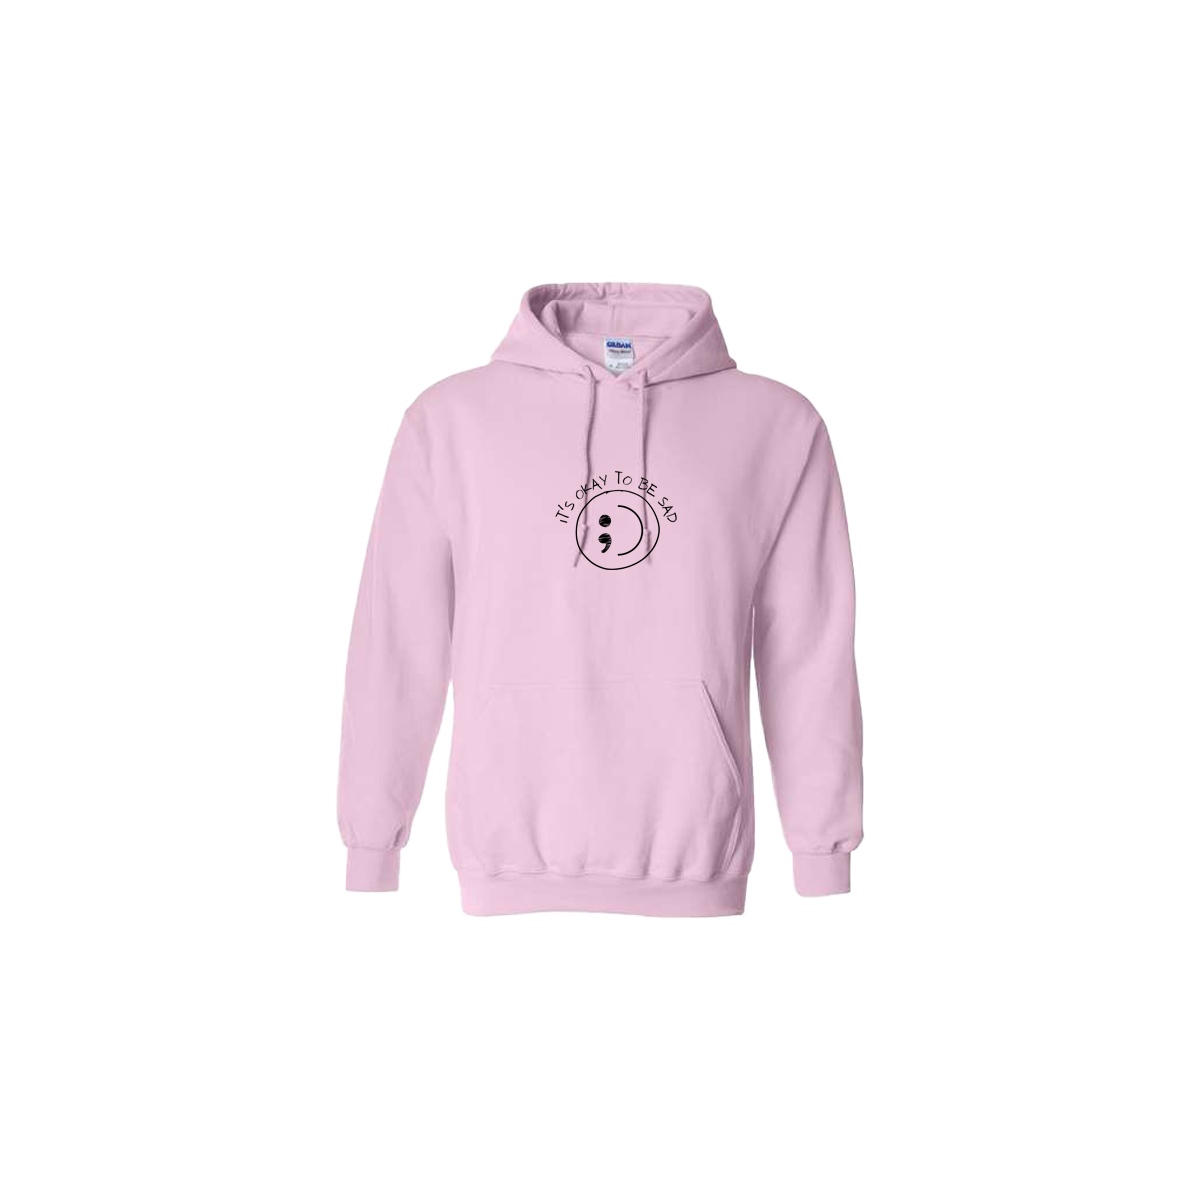 It's Okay to be Sad Embroidered Light Pink Hoodie - Mental Health Awareness Clothing